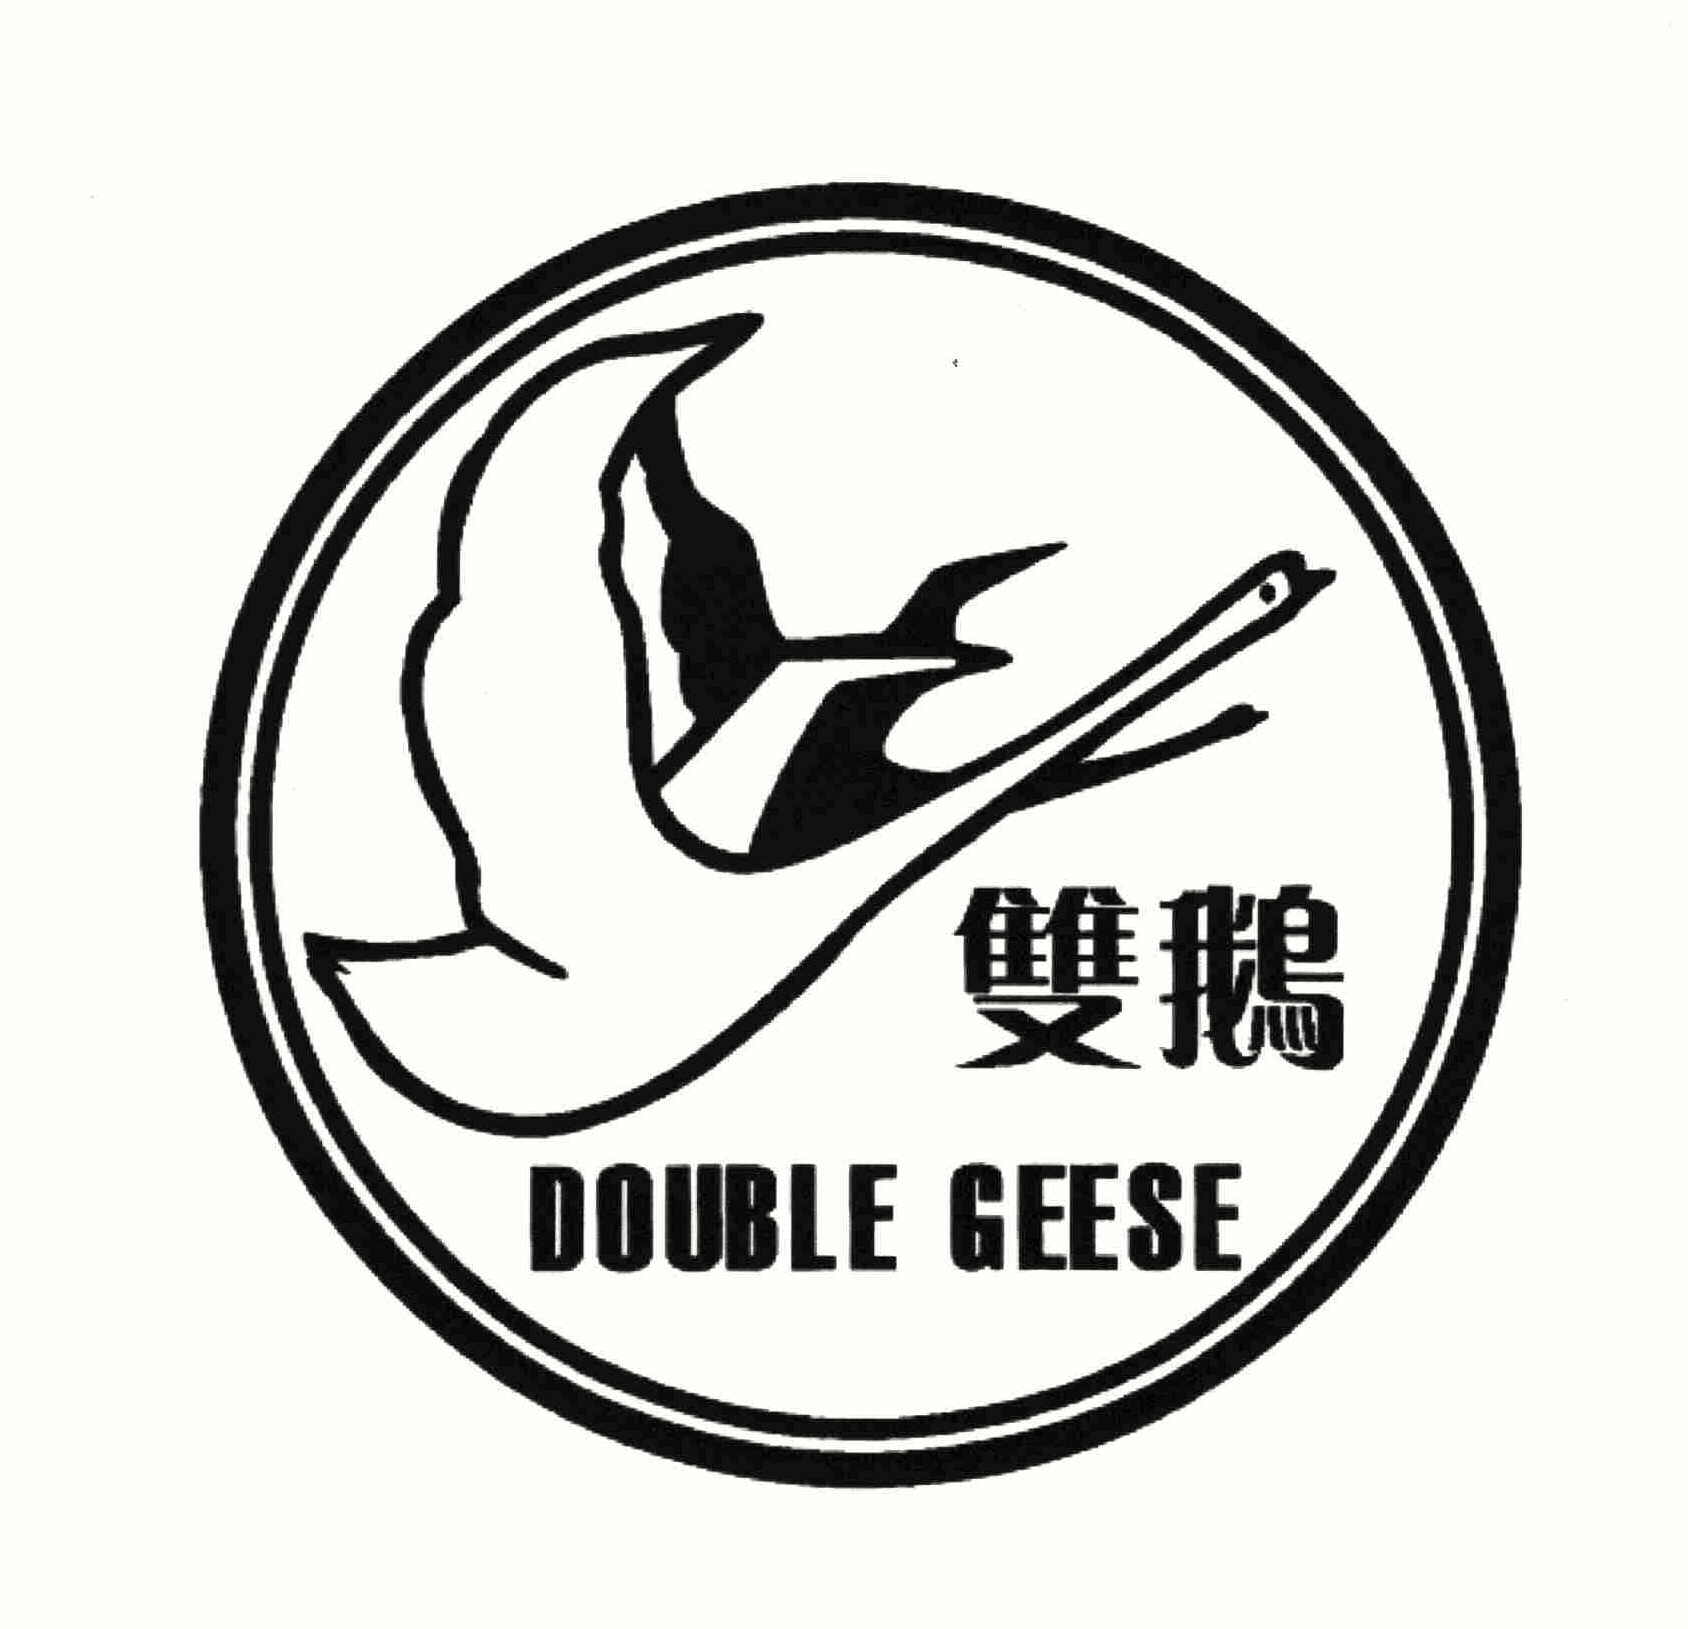  DOUBLE GEESE